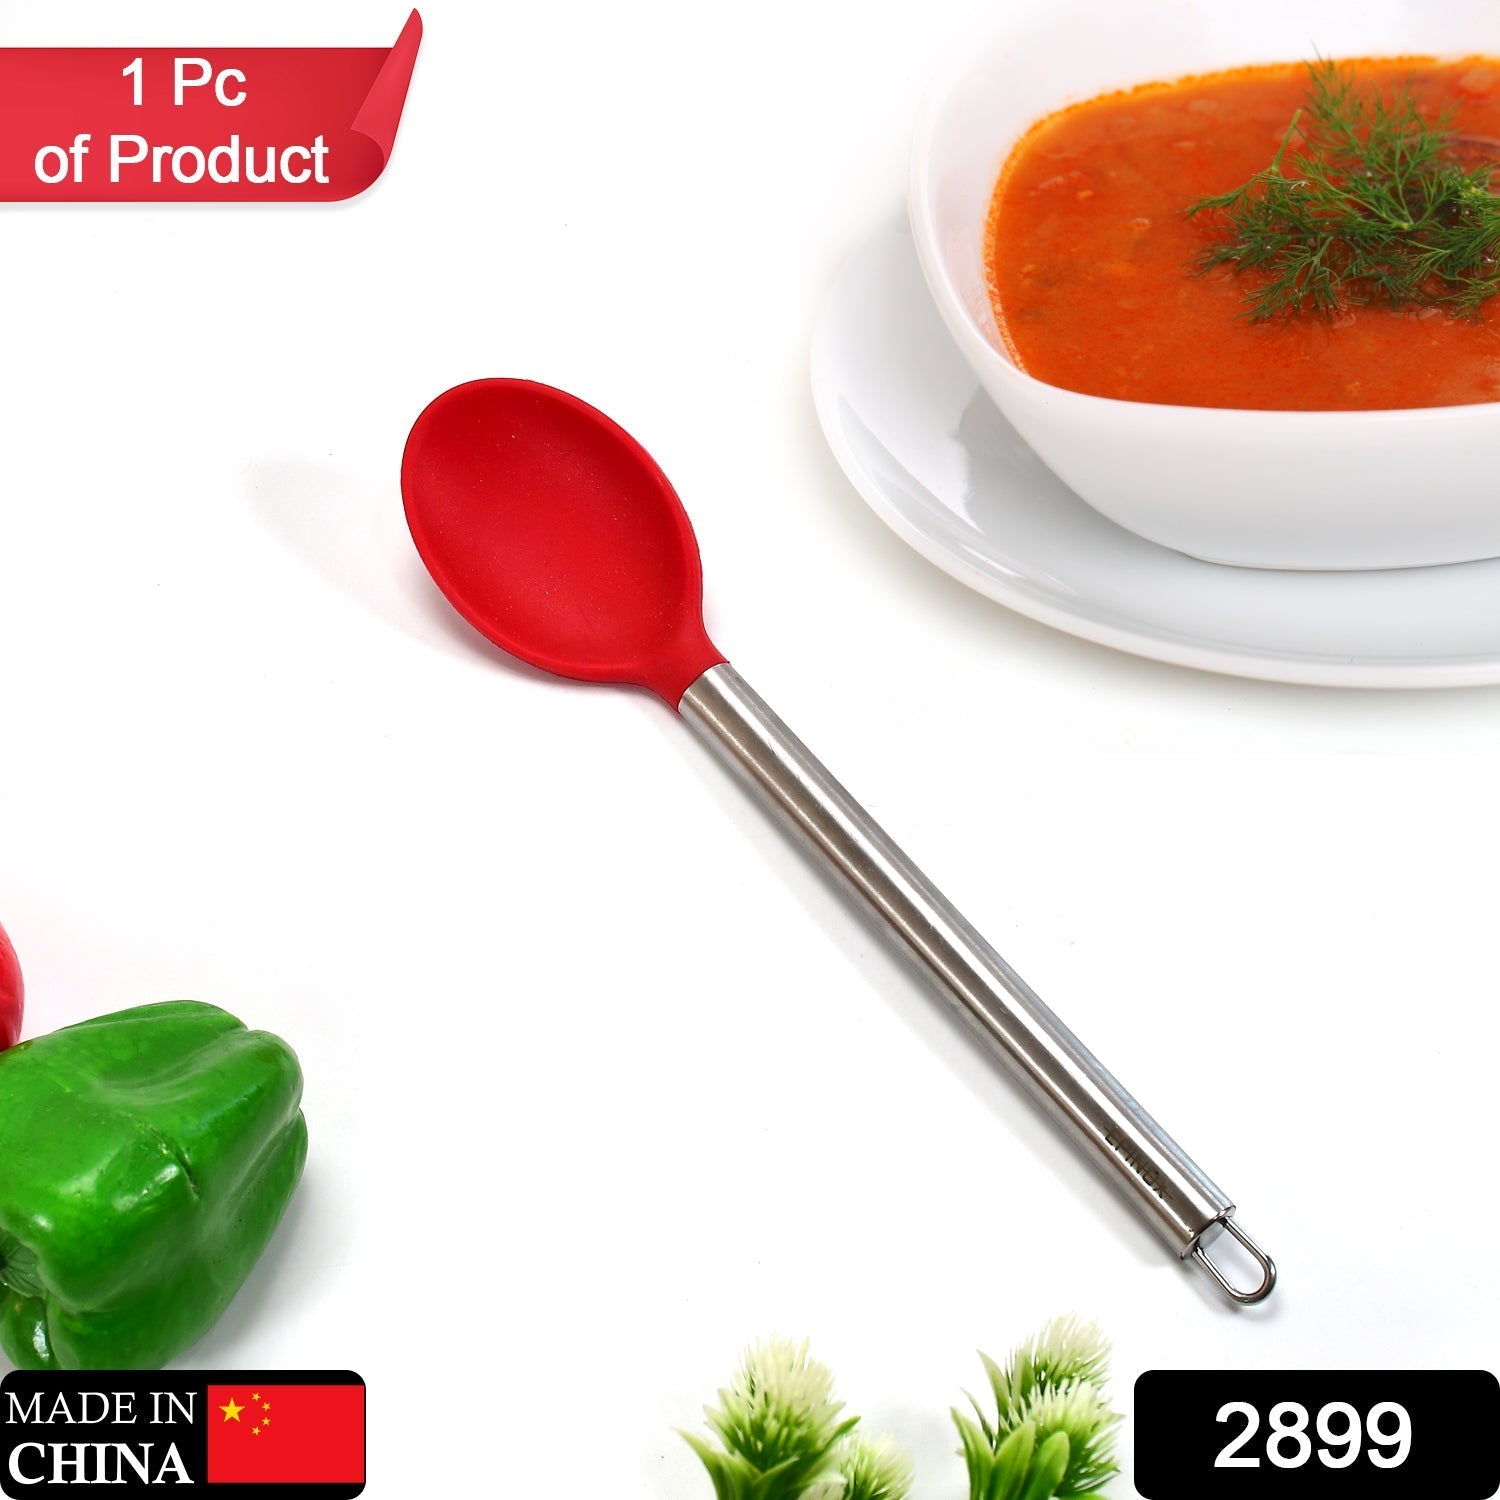 2899 Silicone Serving Spoon with Heat Resistant Silicone Covering Head and Stay-Cool Stainless Steel Handle DeoDap